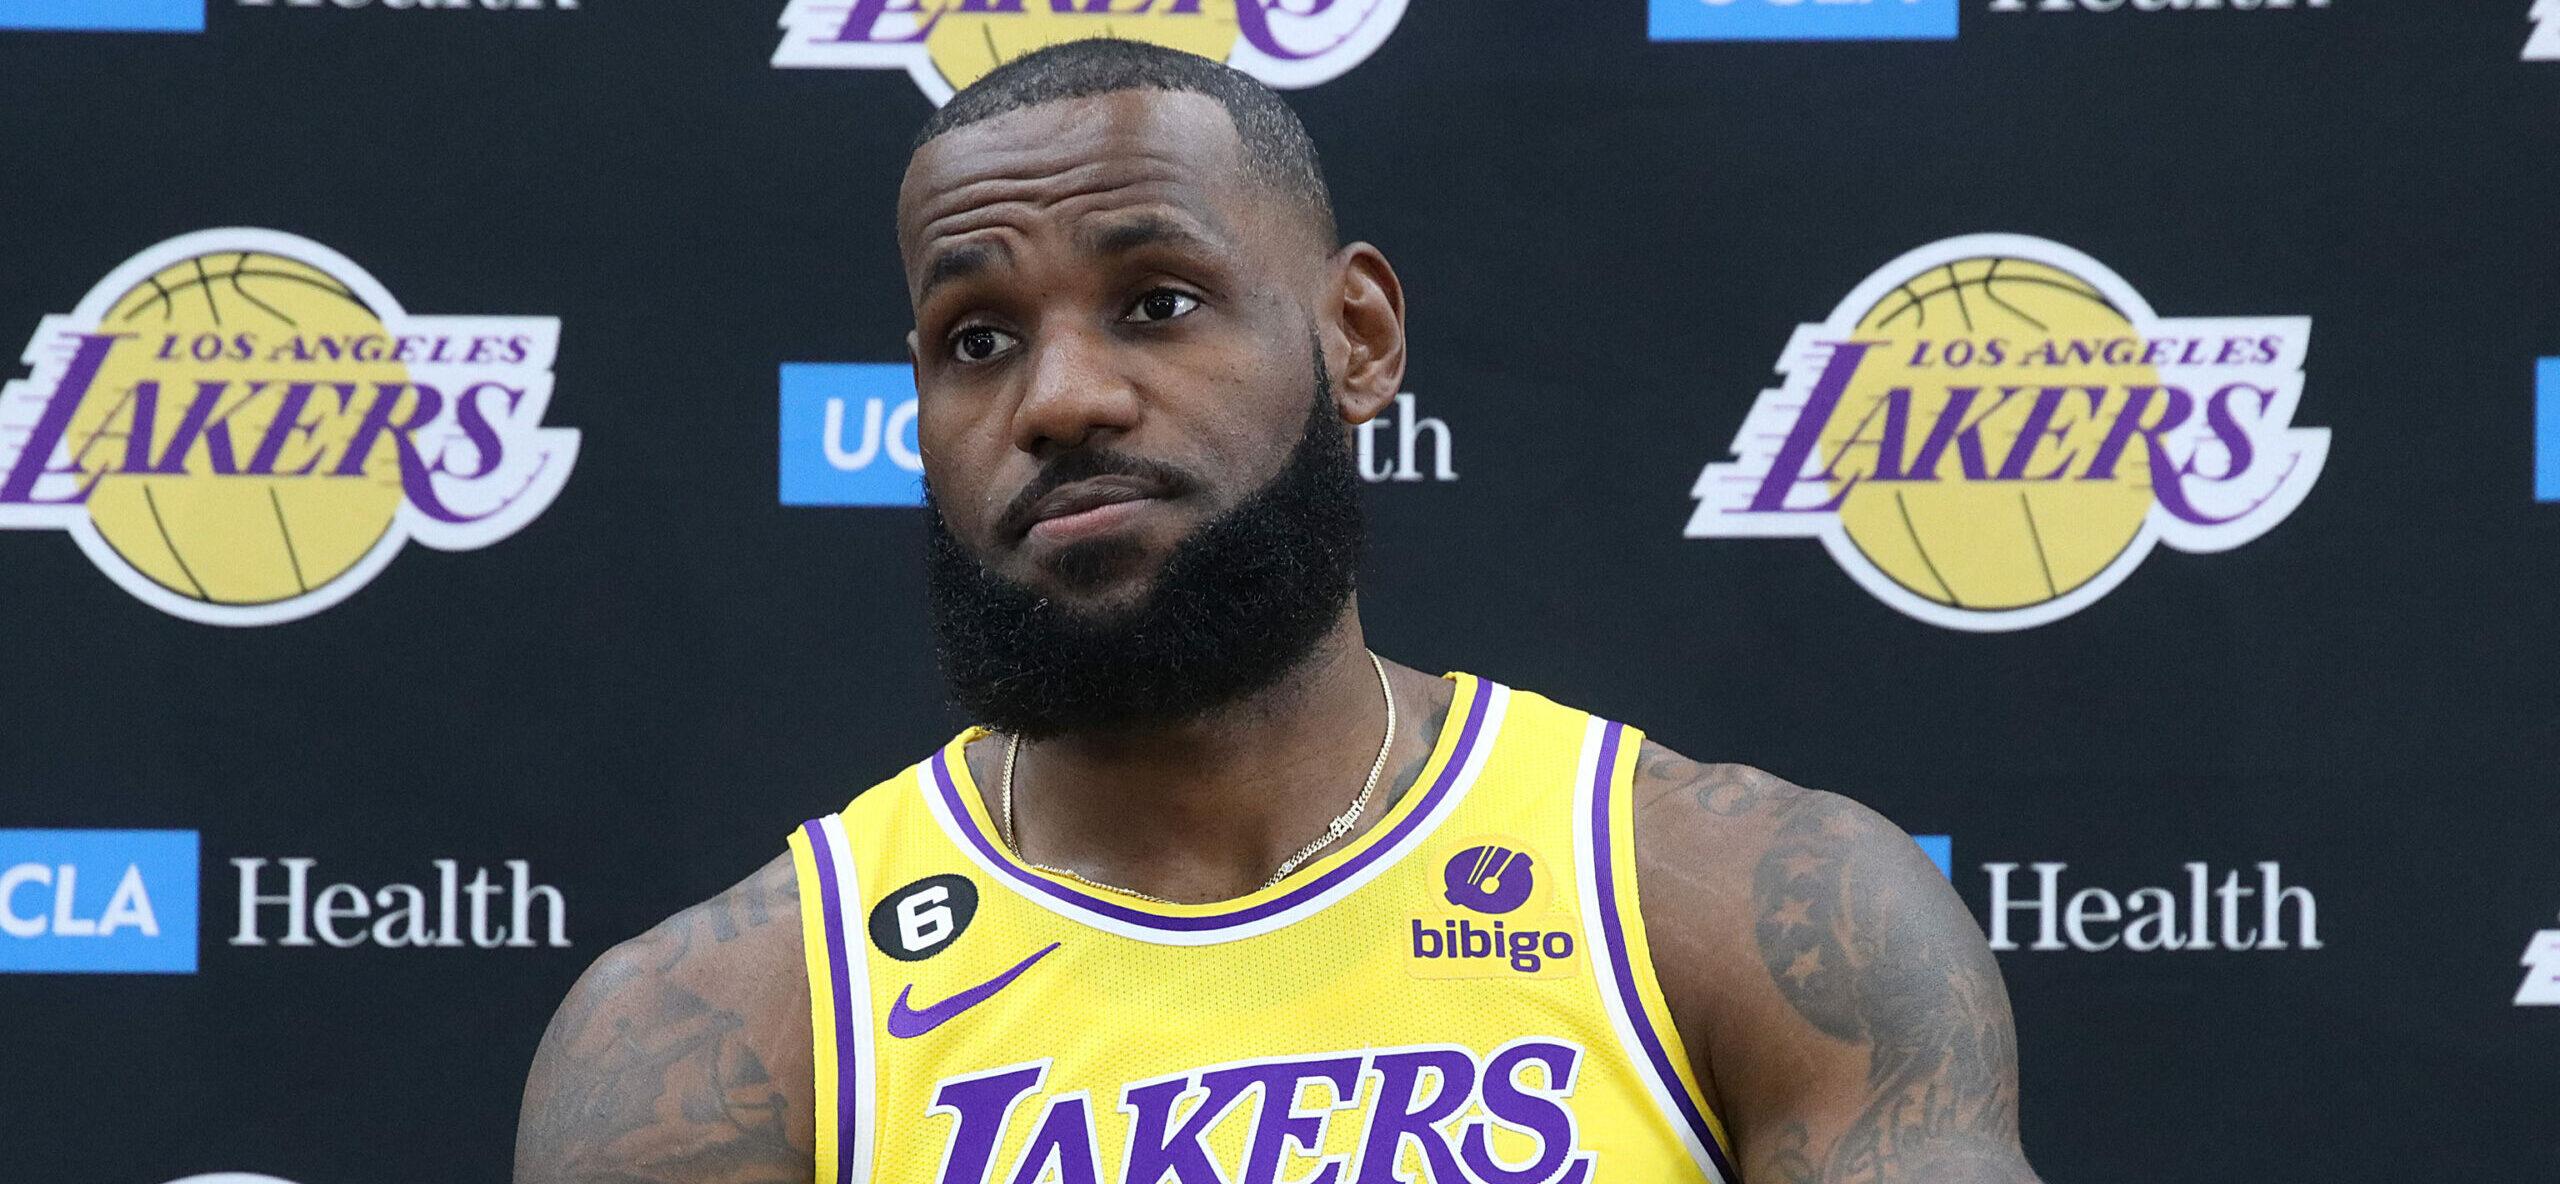 LeBron James Wishes He Could Do ‘Normal Things’; ‘It Can Be Challenging At Times’